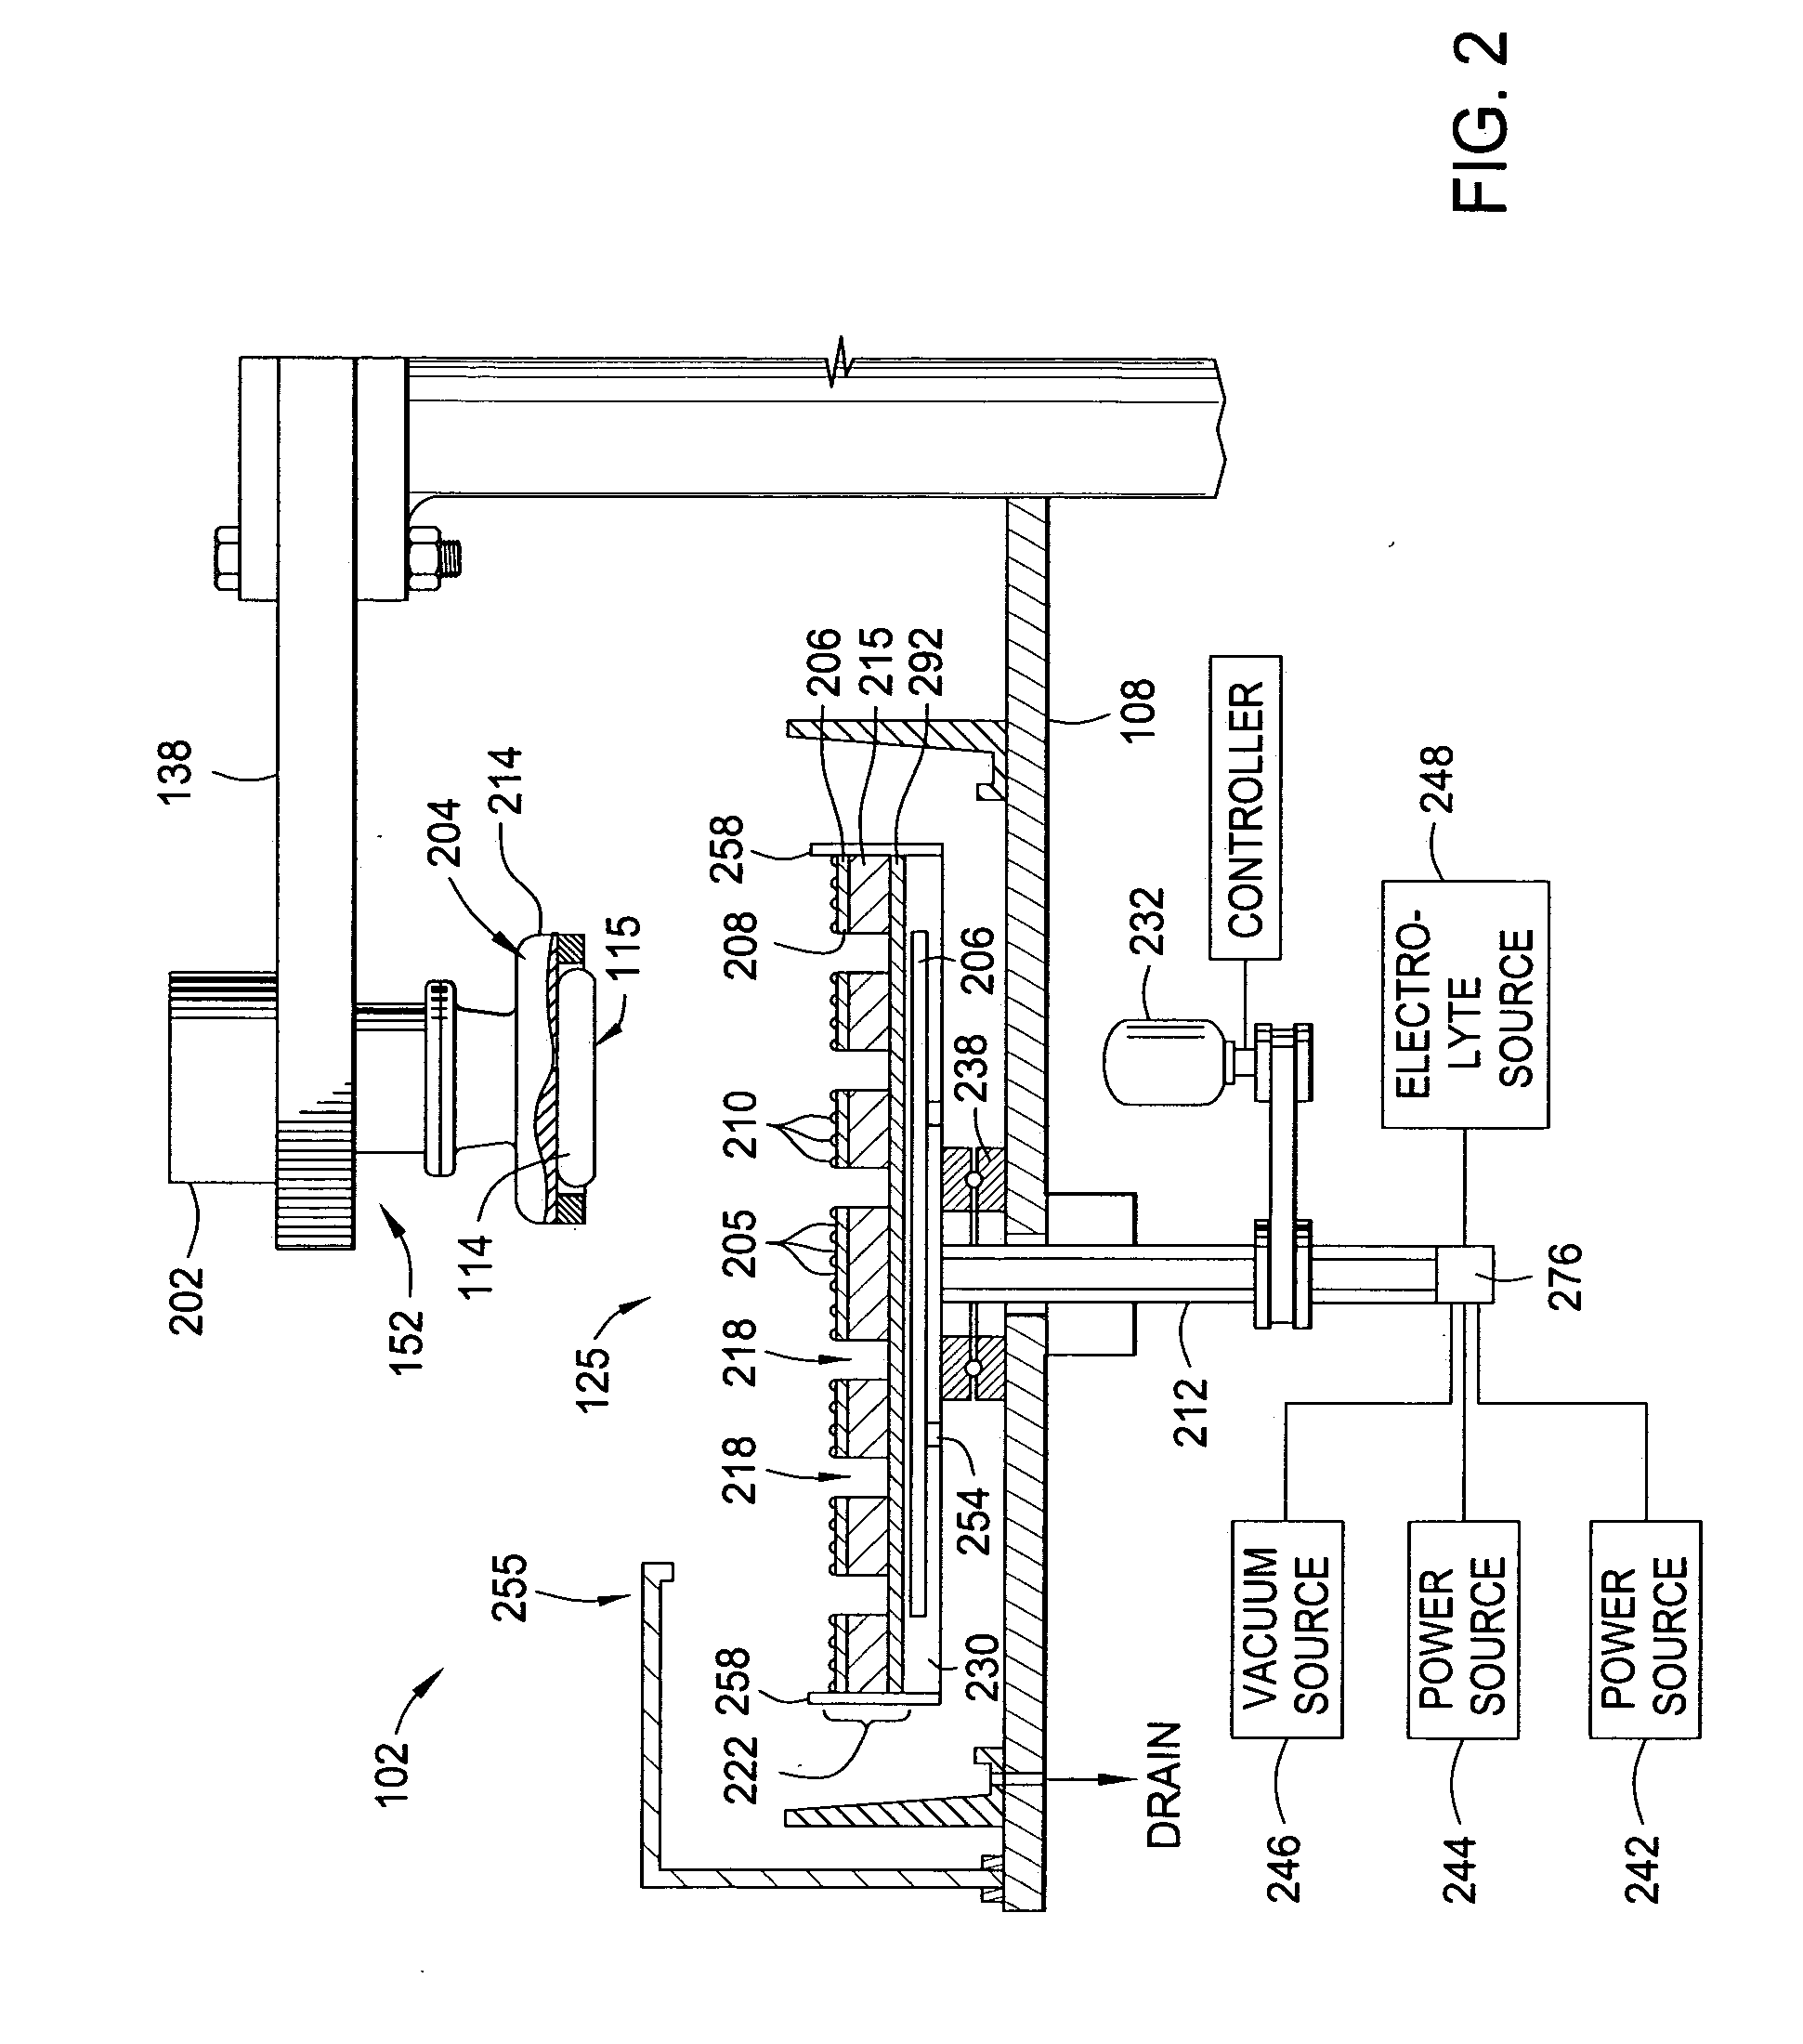 Conductive pad design modification for better wafer-pad contact